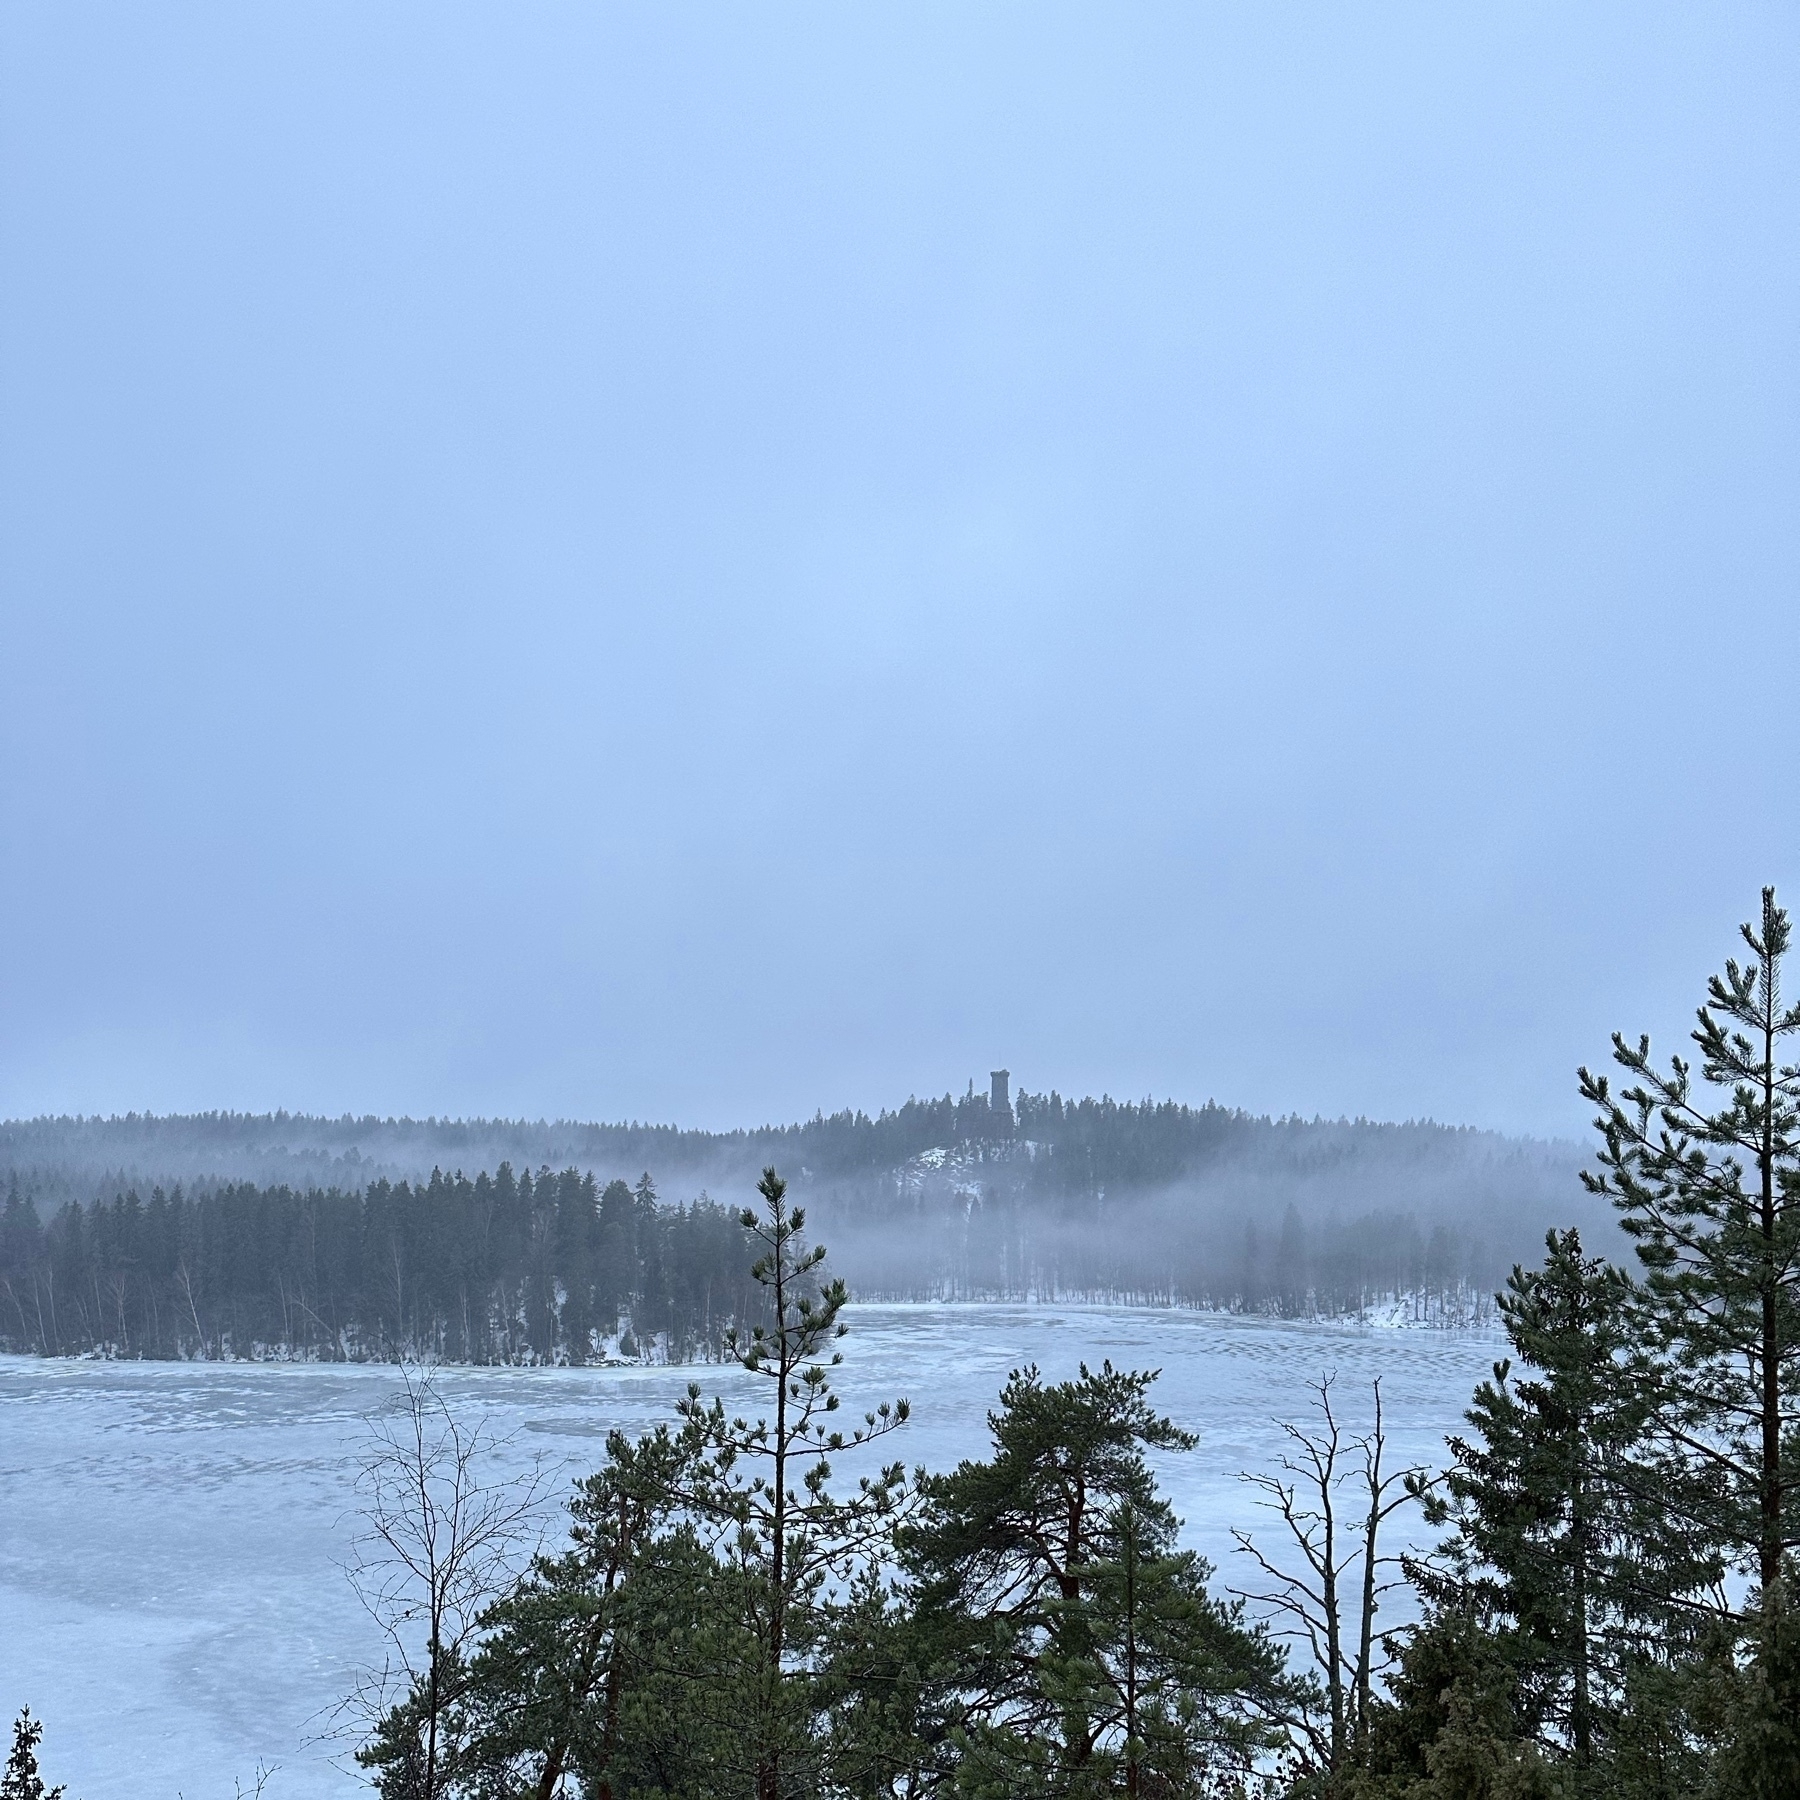 lake, frozen over but water on ice, fog, pine trees and spruces, a tower on the other side of the like on top of a hill